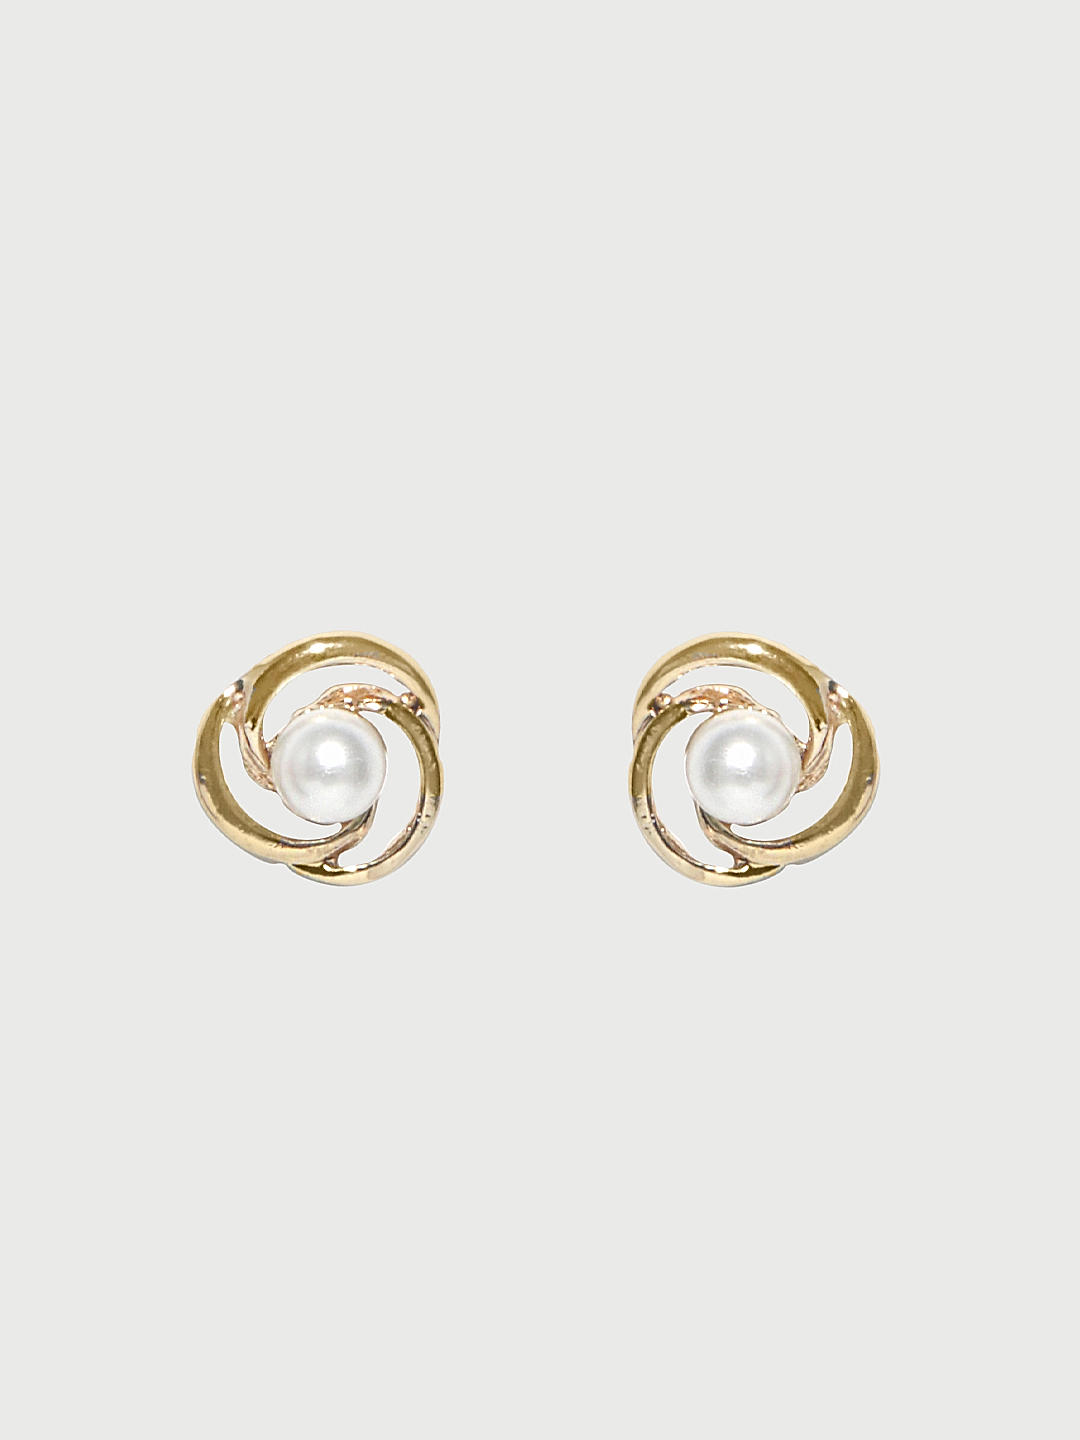 Silver and Gold Plated Stud Earrings by JB Designs. – Smithsonia